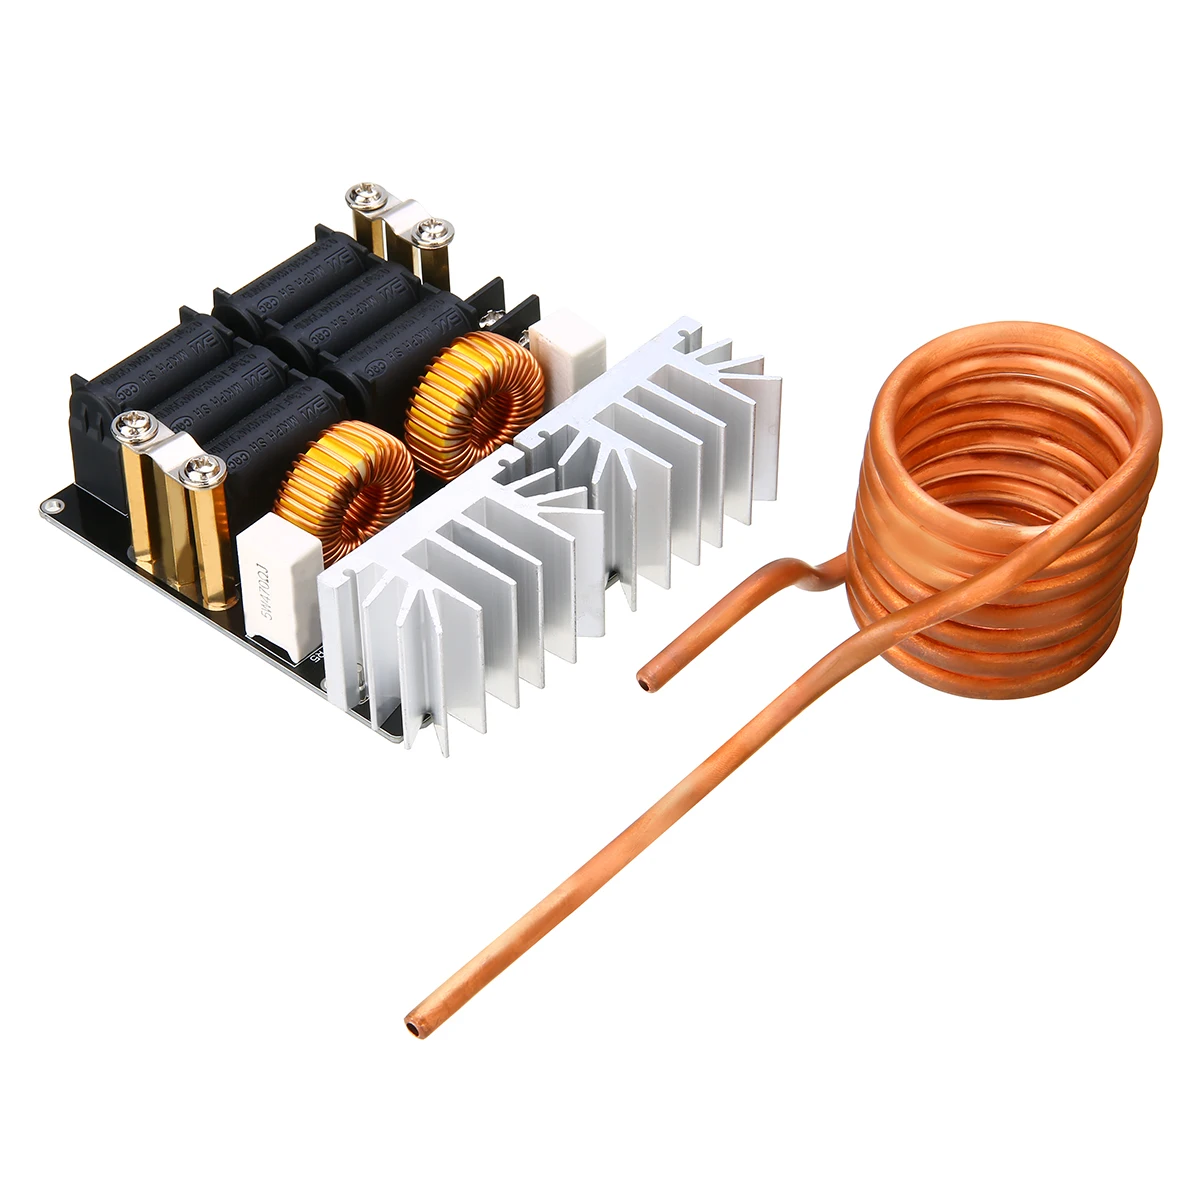 1pc Low Voltage Induction Heating Module DIY Heater Board 1000W ZVS with Tesla Coil